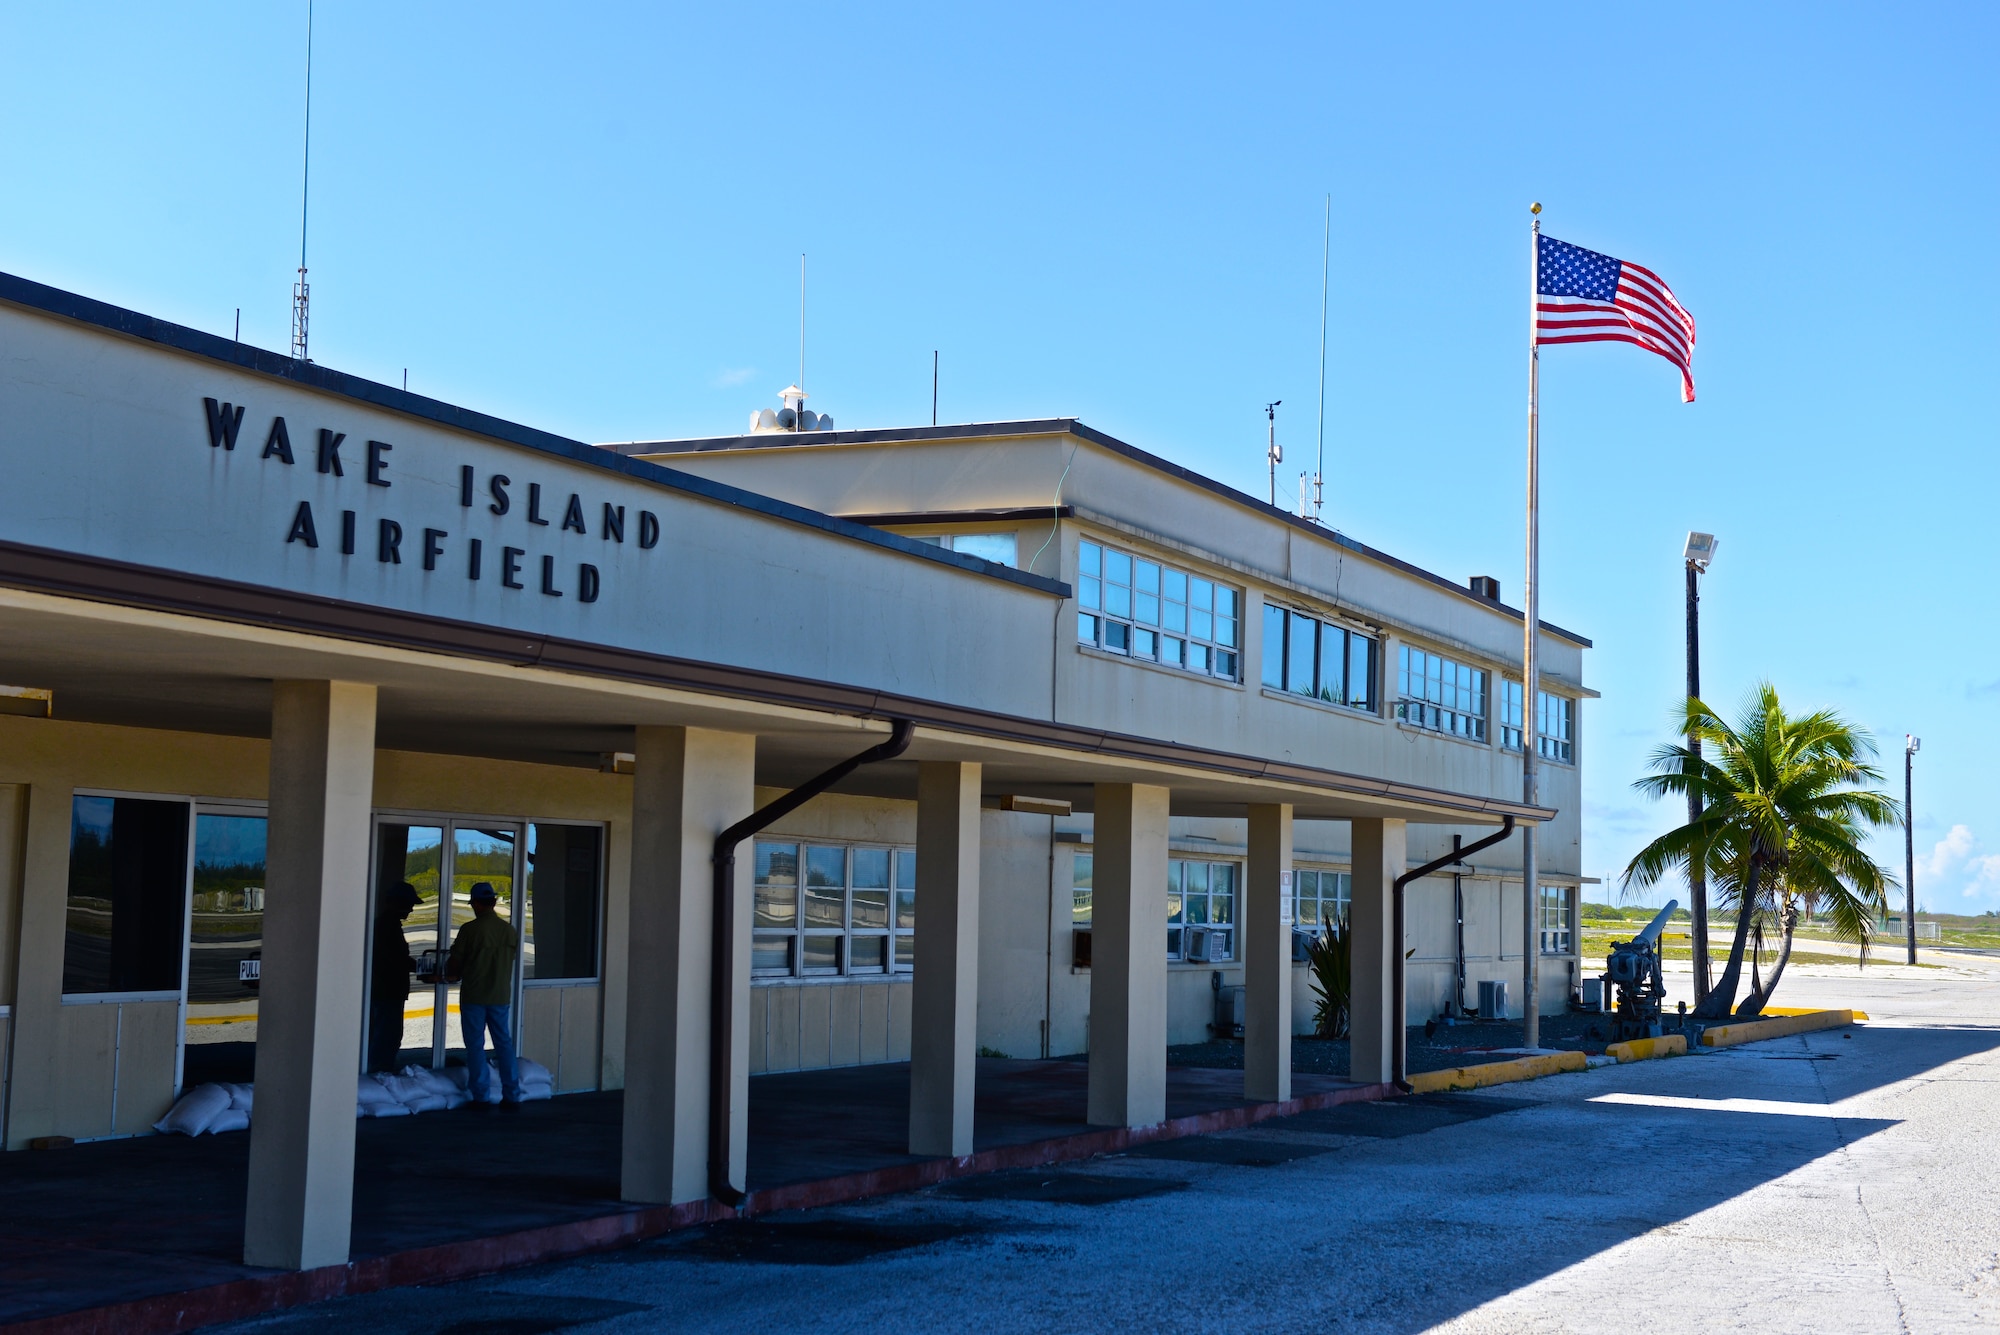 An contractor assigned to Wake Island Airfield opens the passenger terminal building July 20, 2015, after a typhoon hit the small atoll and forced the entire staff to evacuate the island a few days earlier. A team with the 36th Contingency Response Group at Andersen Air Force Base, Guam, deployed to the atoll to assist in airfield storm recovery efforts. (U.S. Air Force photo by Senior Airman Alexander W. Riedel/Released)